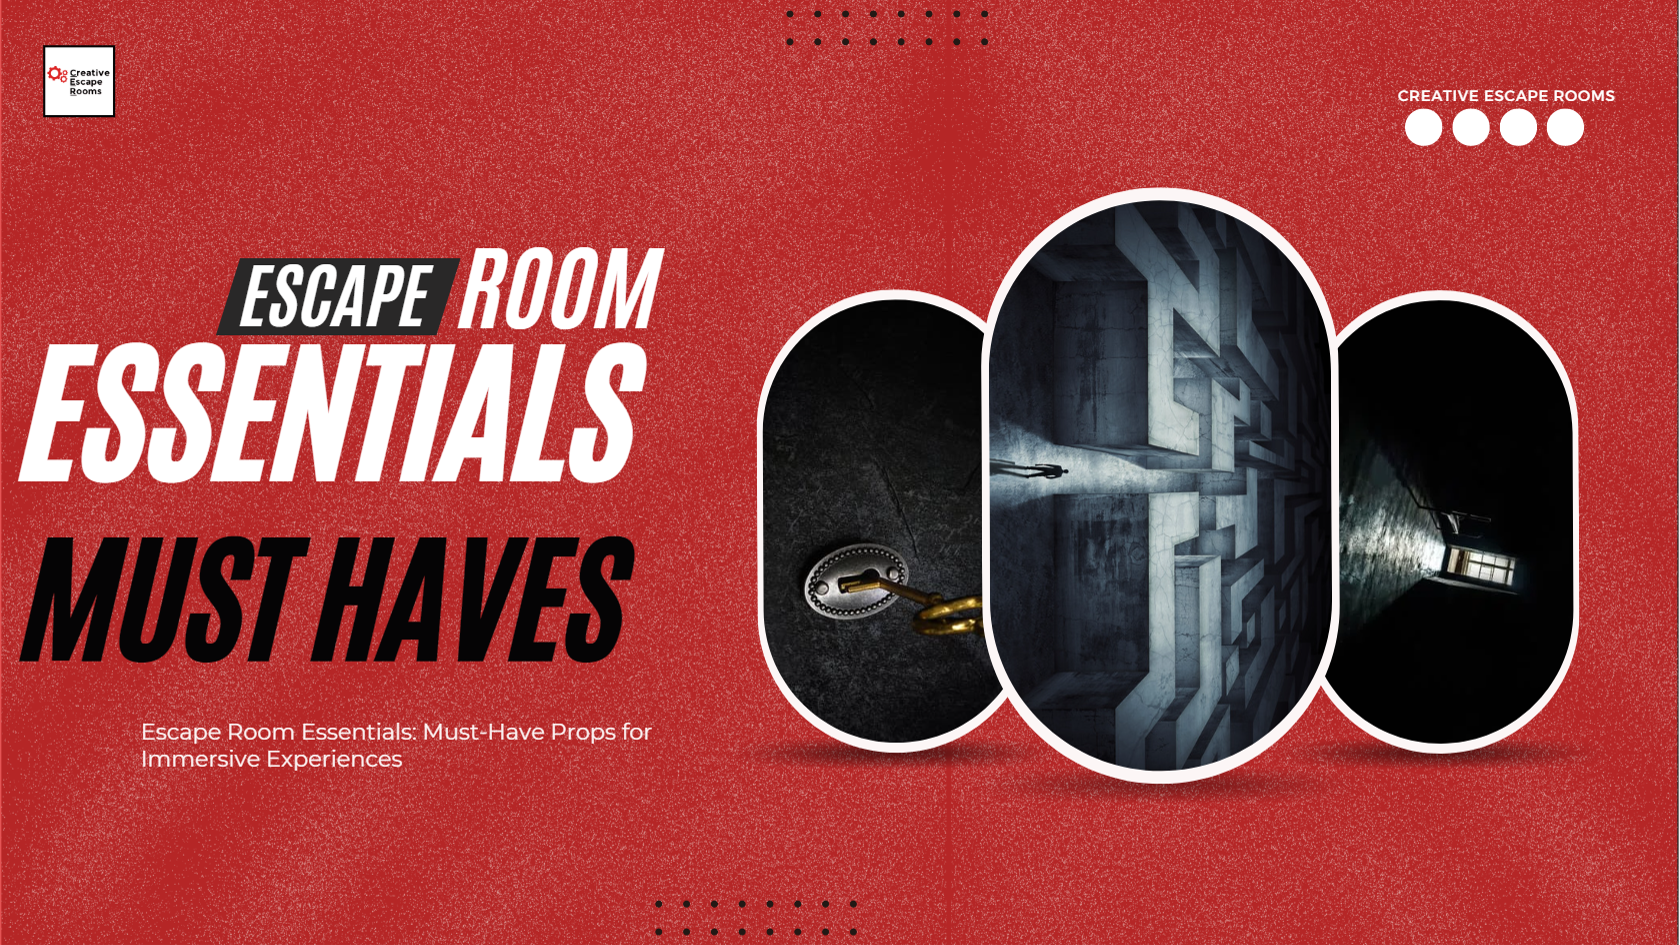 Escape Room Essentials: Must-Have Props for Immersive Experiences